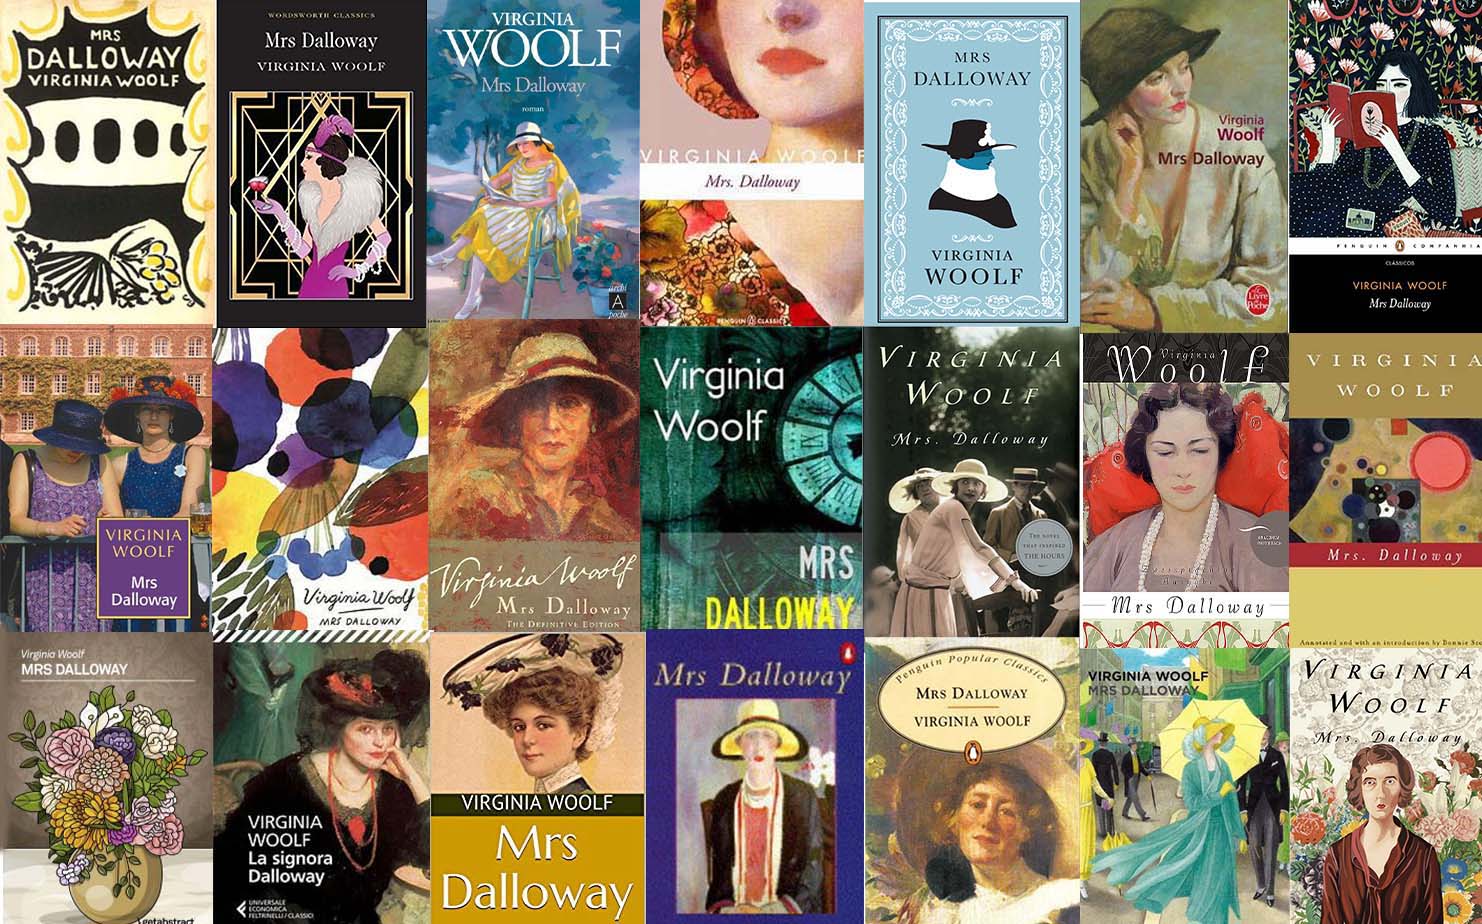 Mrs. Dalloway's Bookstore Events - 10 Upcoming Activities and Tickets